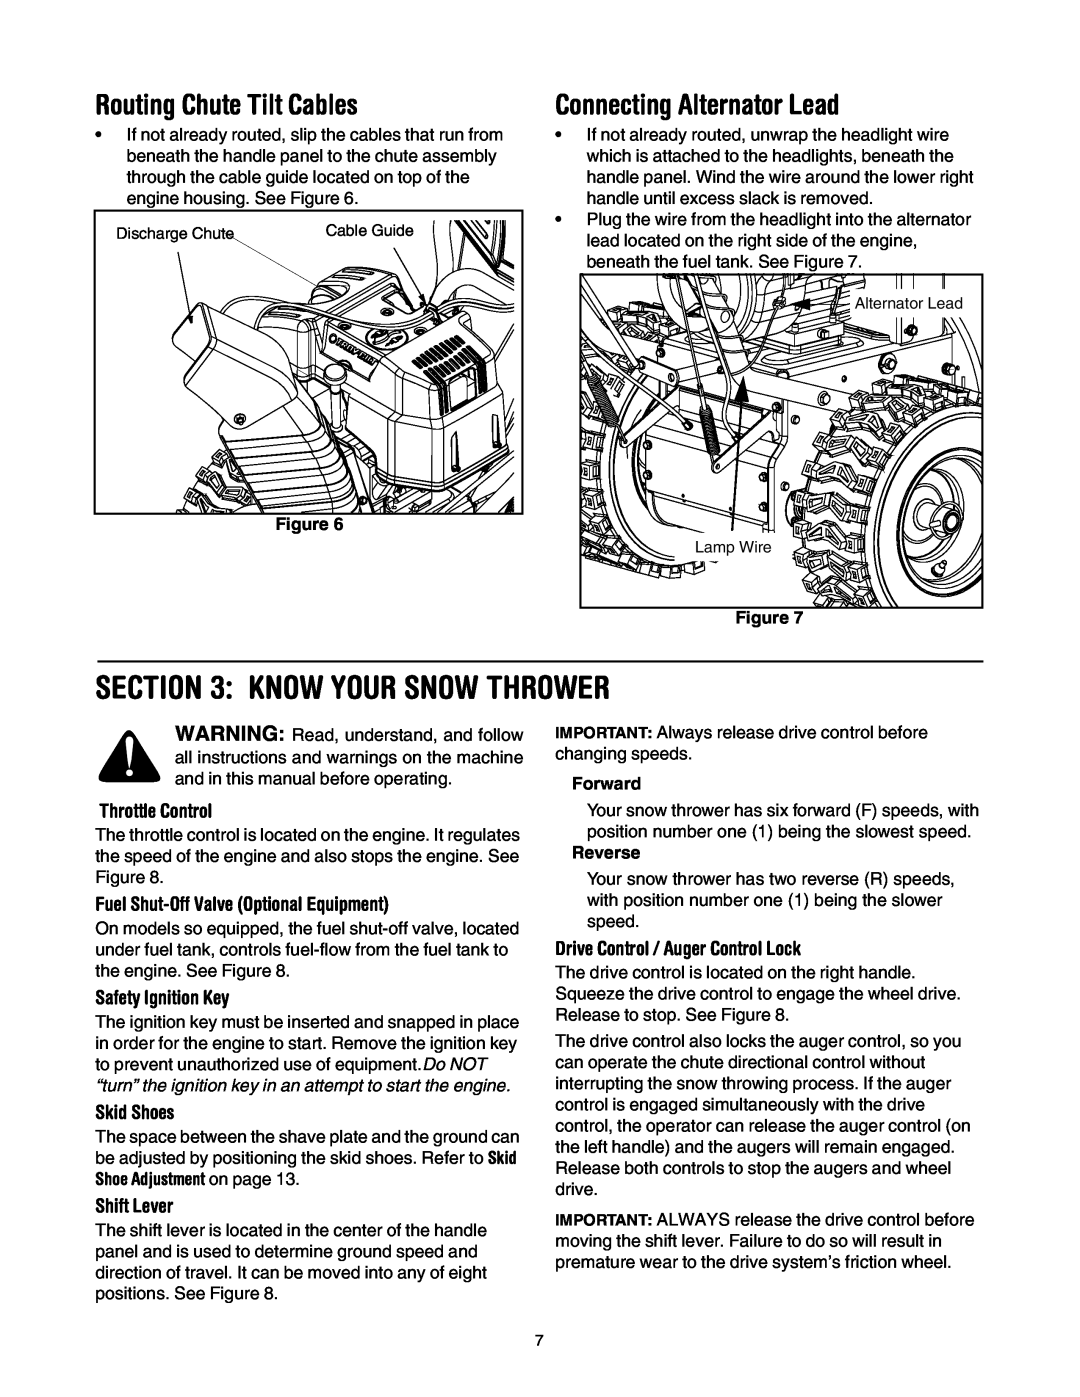 Troy-Bilt 10530 Know Your Snow Thrower, Routing Chute Tilt Cables, Connecting Alternator Lead, Throttle Control, Forward 